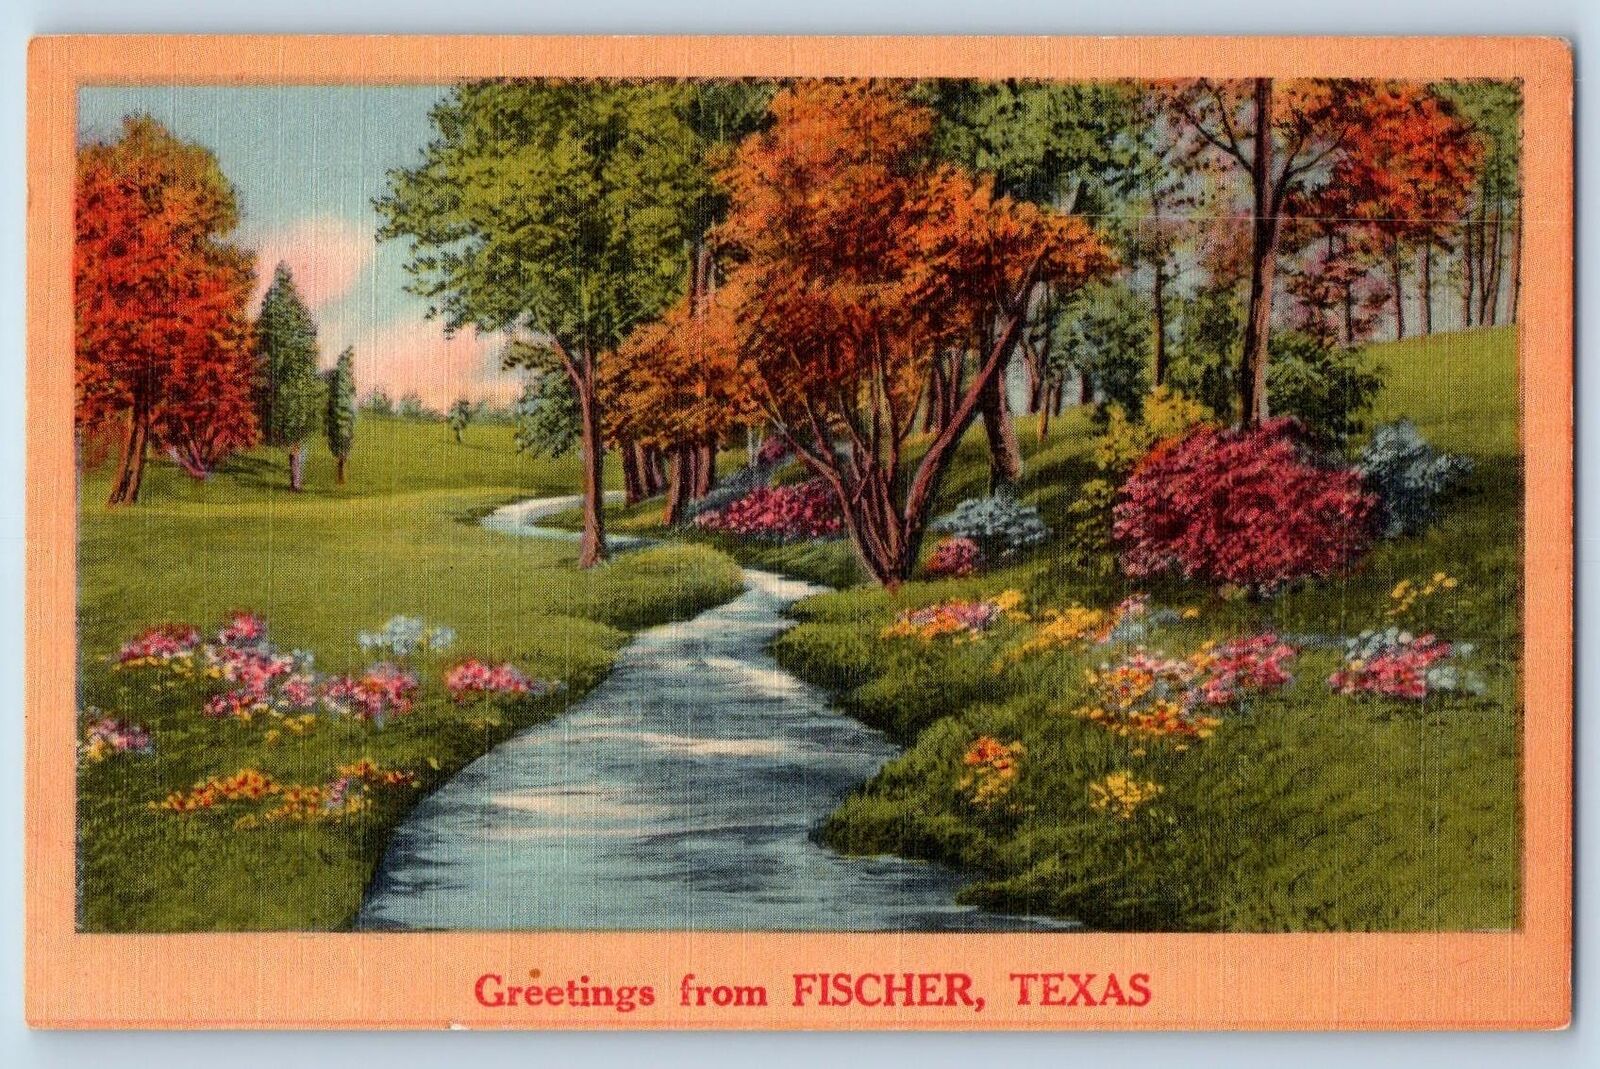 Fischer Texas TX Postcard Greetings River And Trees Scenic View c1940's Vintage